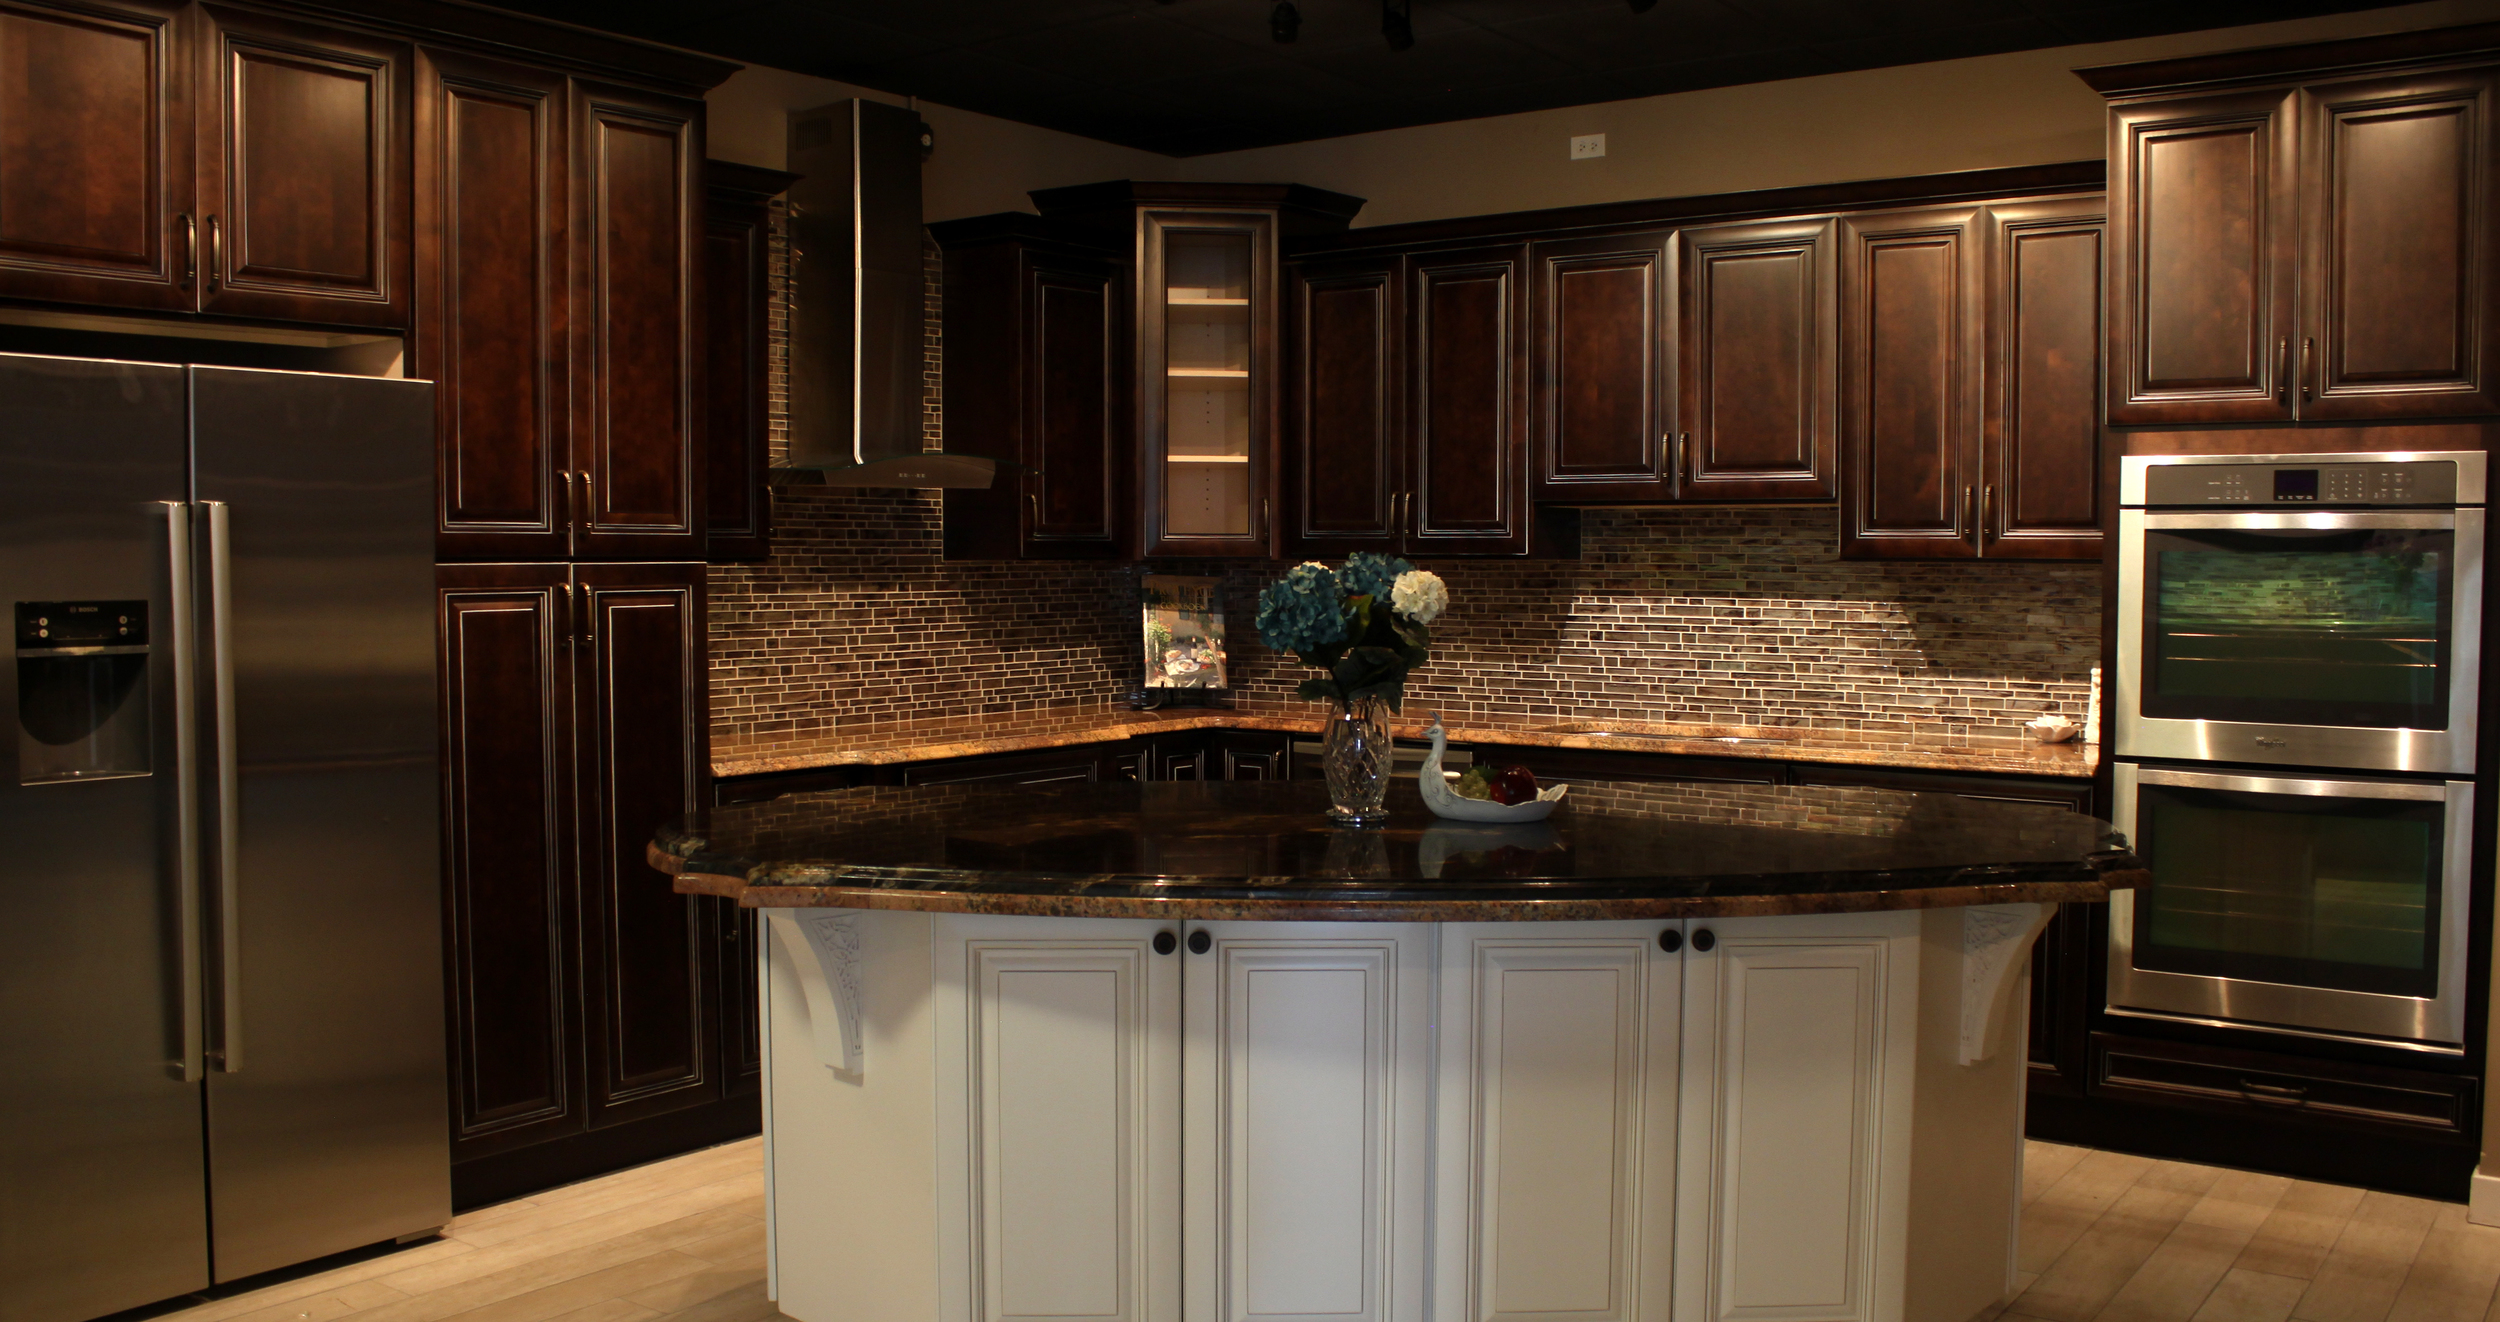 glencoe kitchen cabinets, sinks and countertops — rock counter